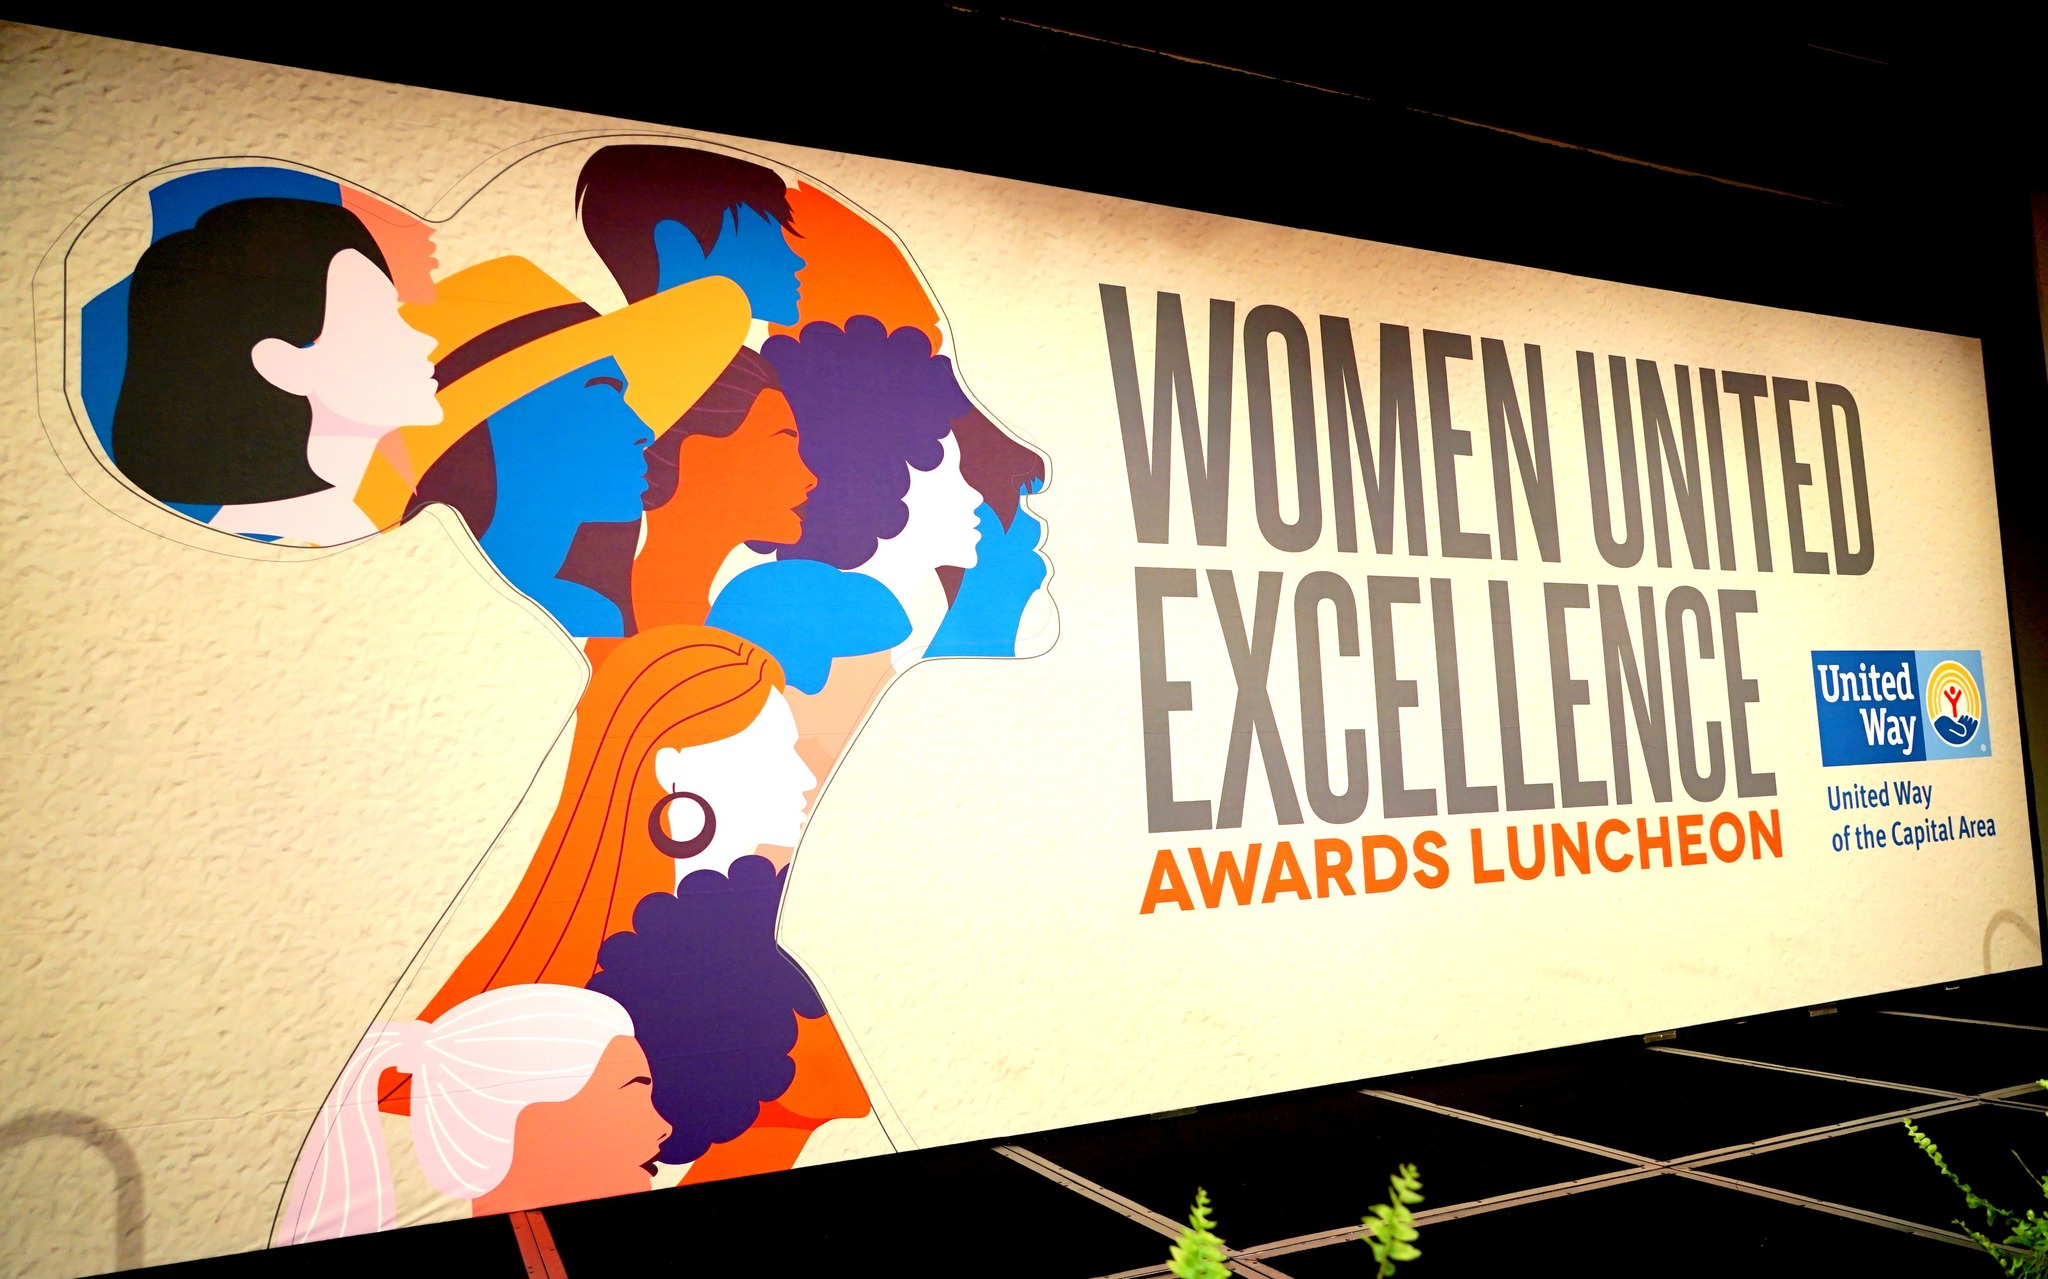 Women United Excellence Award luncheon